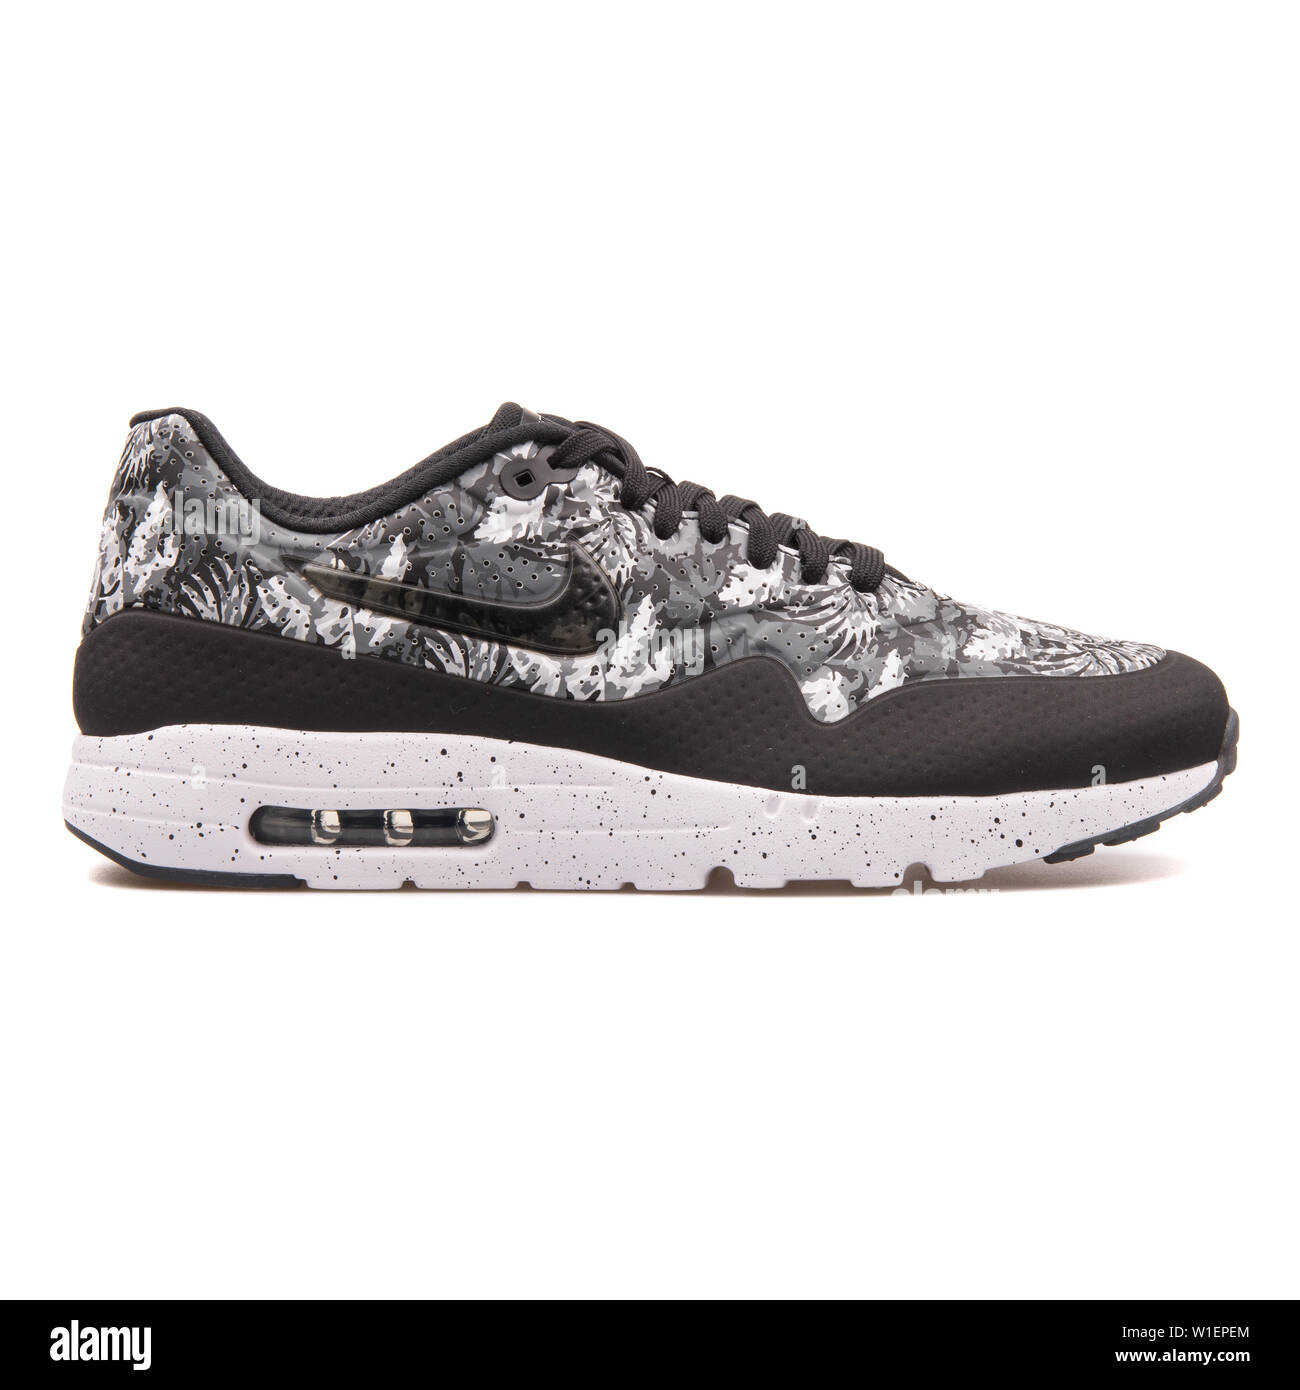 VIENNA, AUSTRIA - AUGUST 10, 2017: Nike Air Max 1 Ultra Moire black and  white sneaker on white background Stock Photo - Alamy